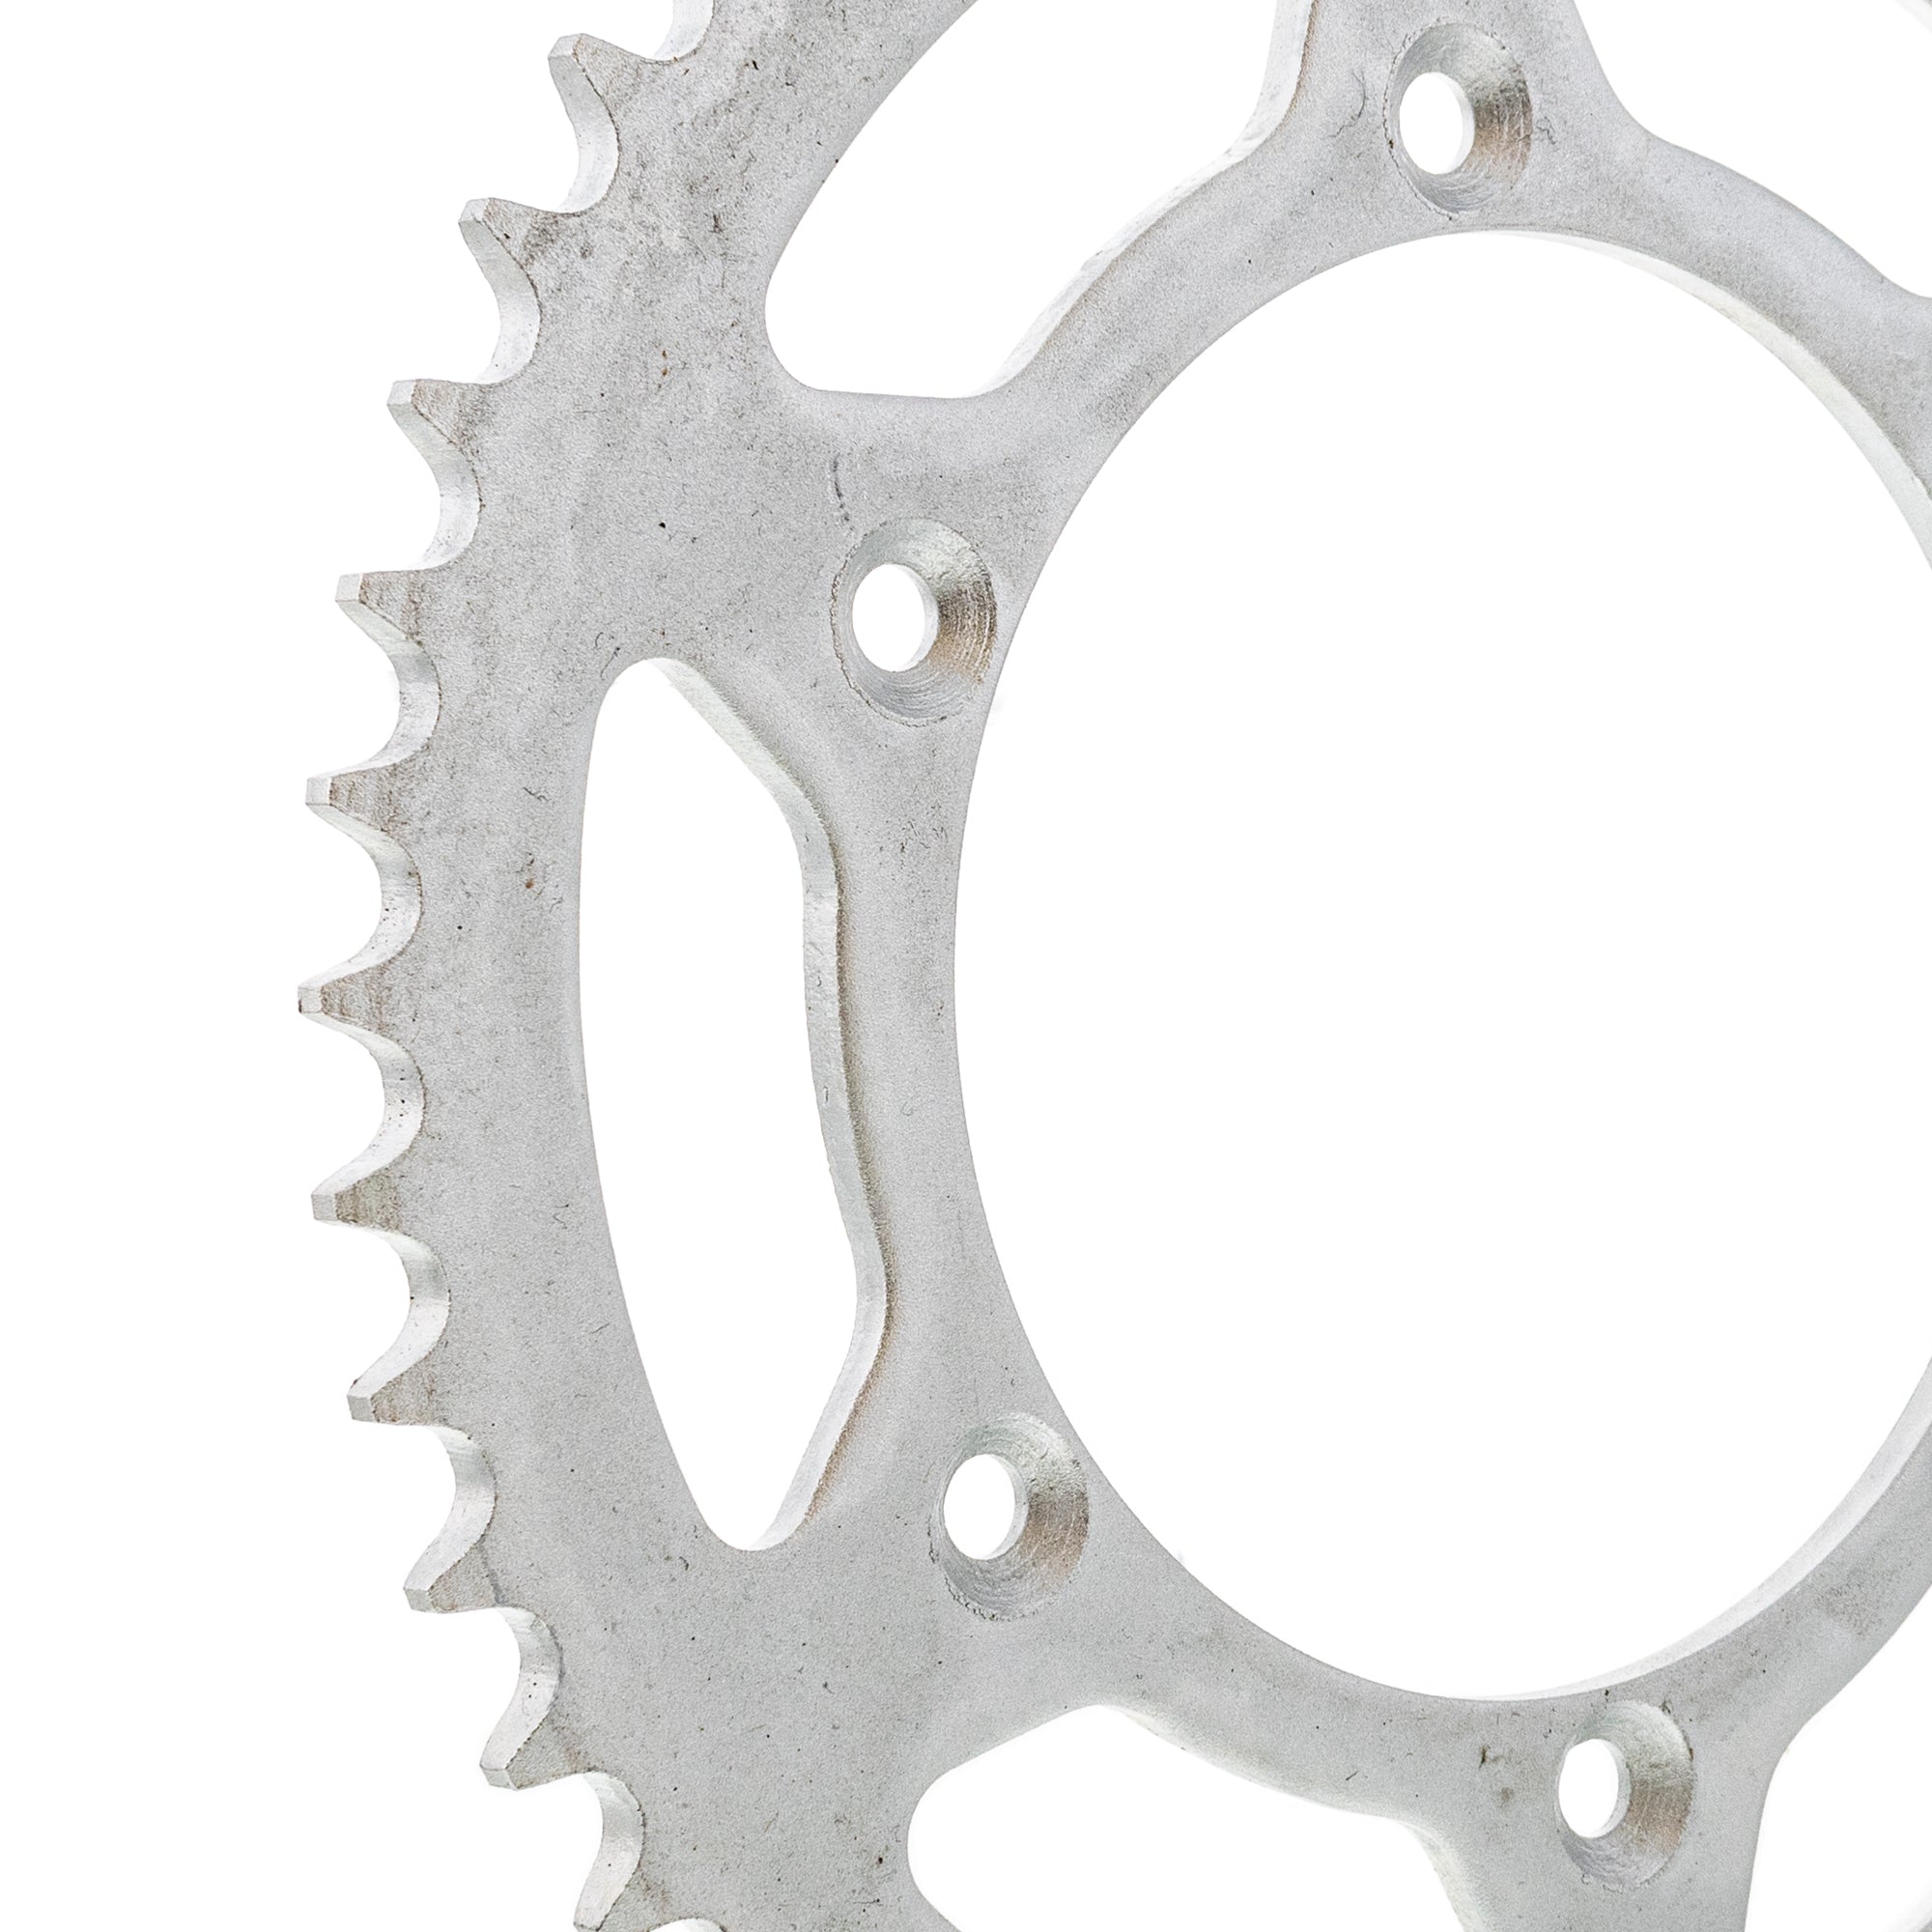 520 Pitch Front & Rear Tooth Drive Sprocket Kit for Kawasaki KLX300R